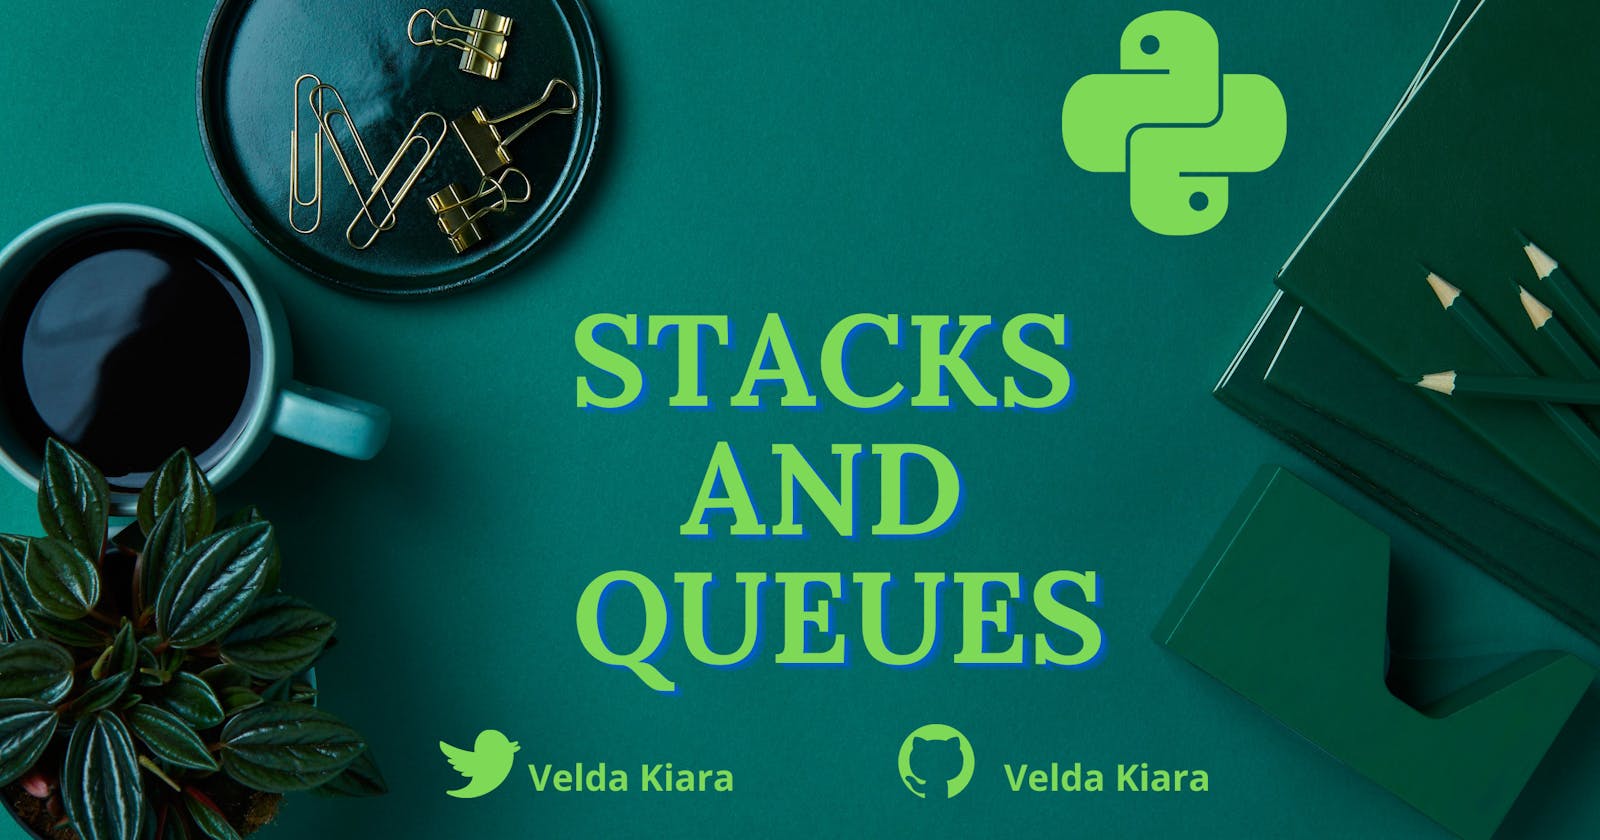 Data Structures: Stacks and Queues